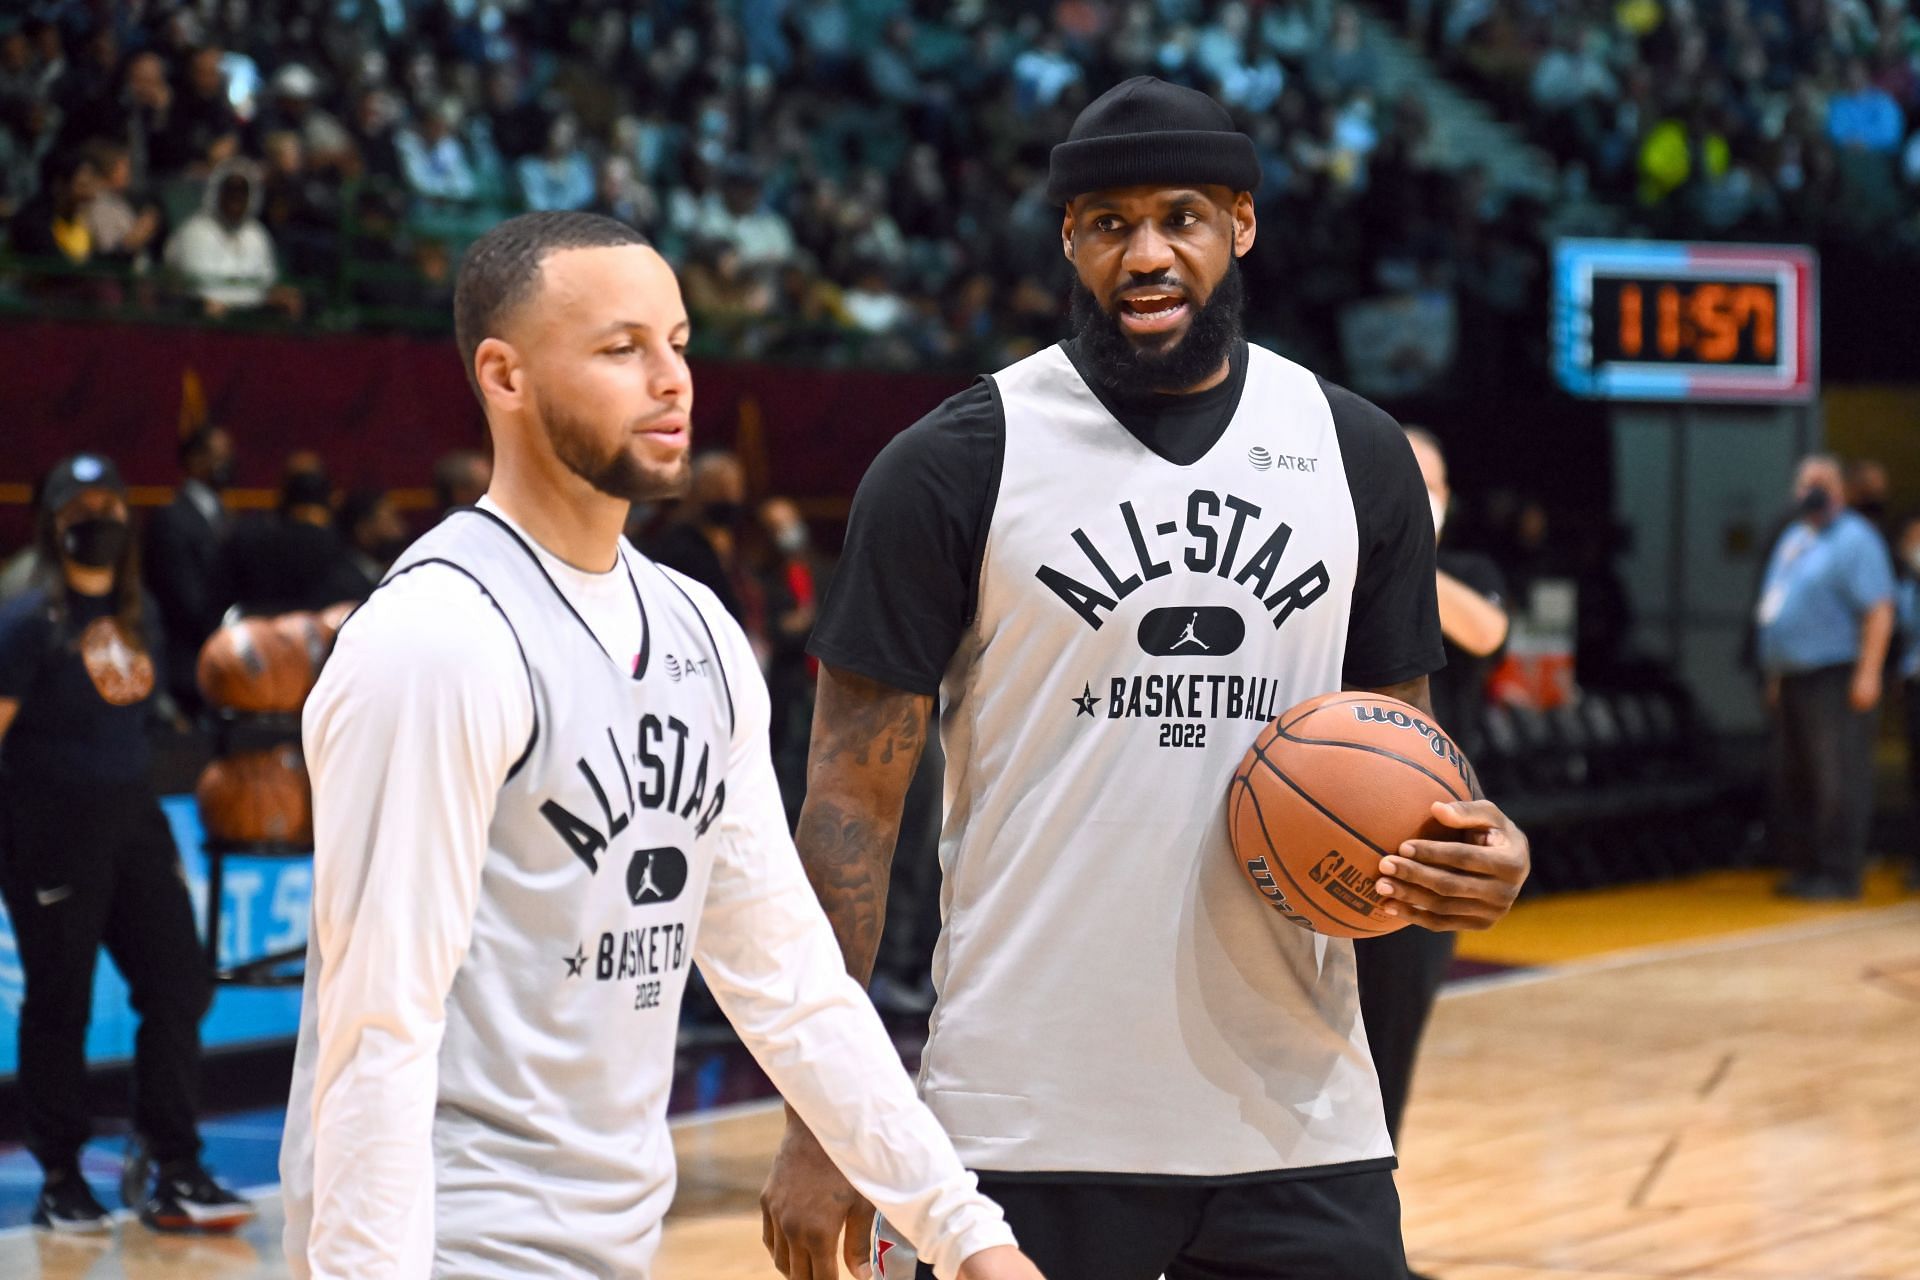 Steph Curry (left) and LeBron James